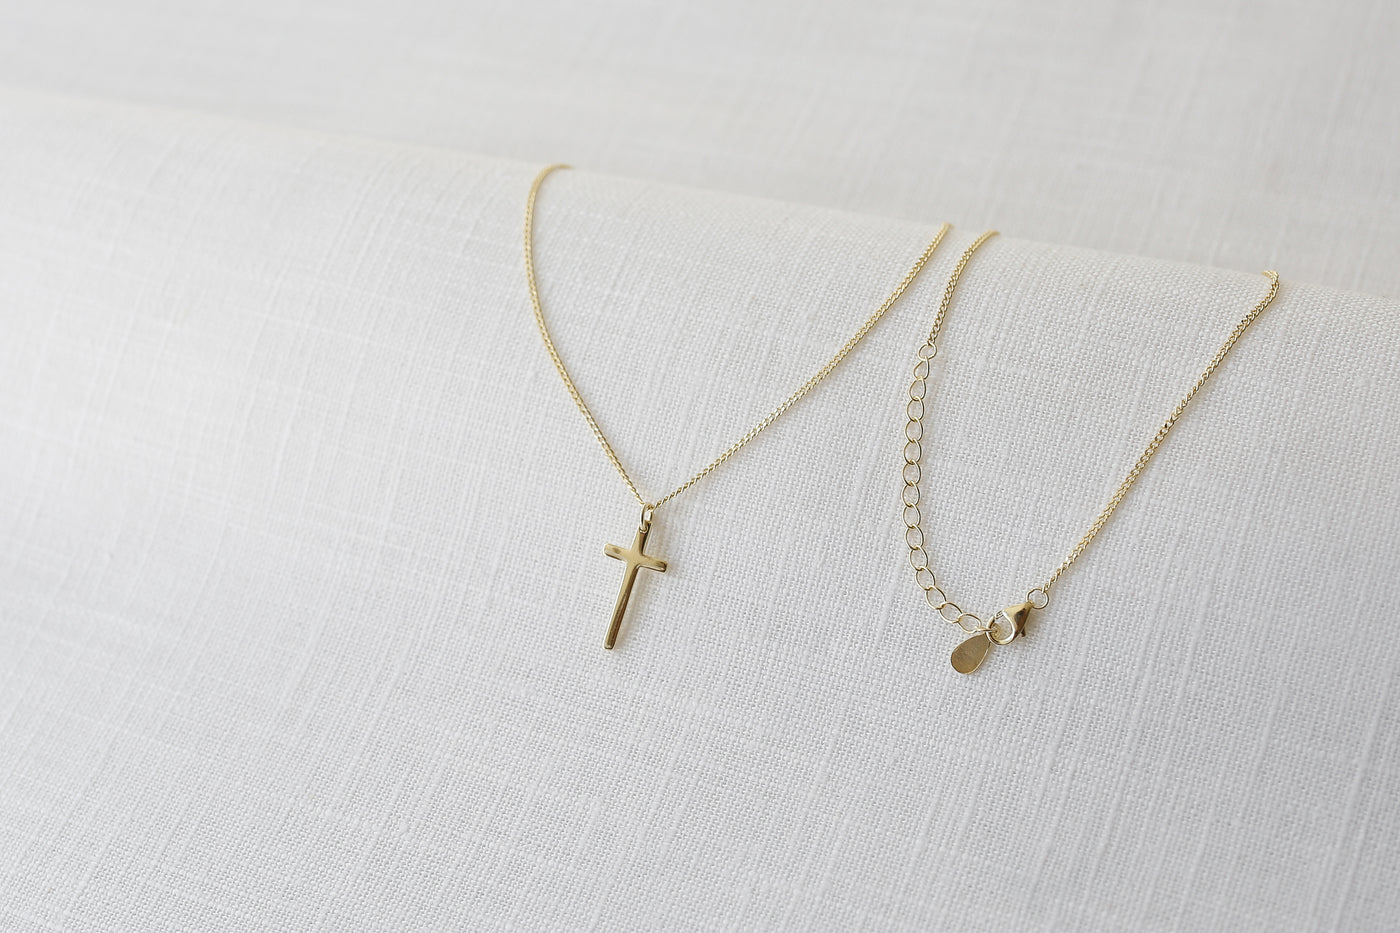 Sterling silver necklace with cross pendant and Happiness greeting card